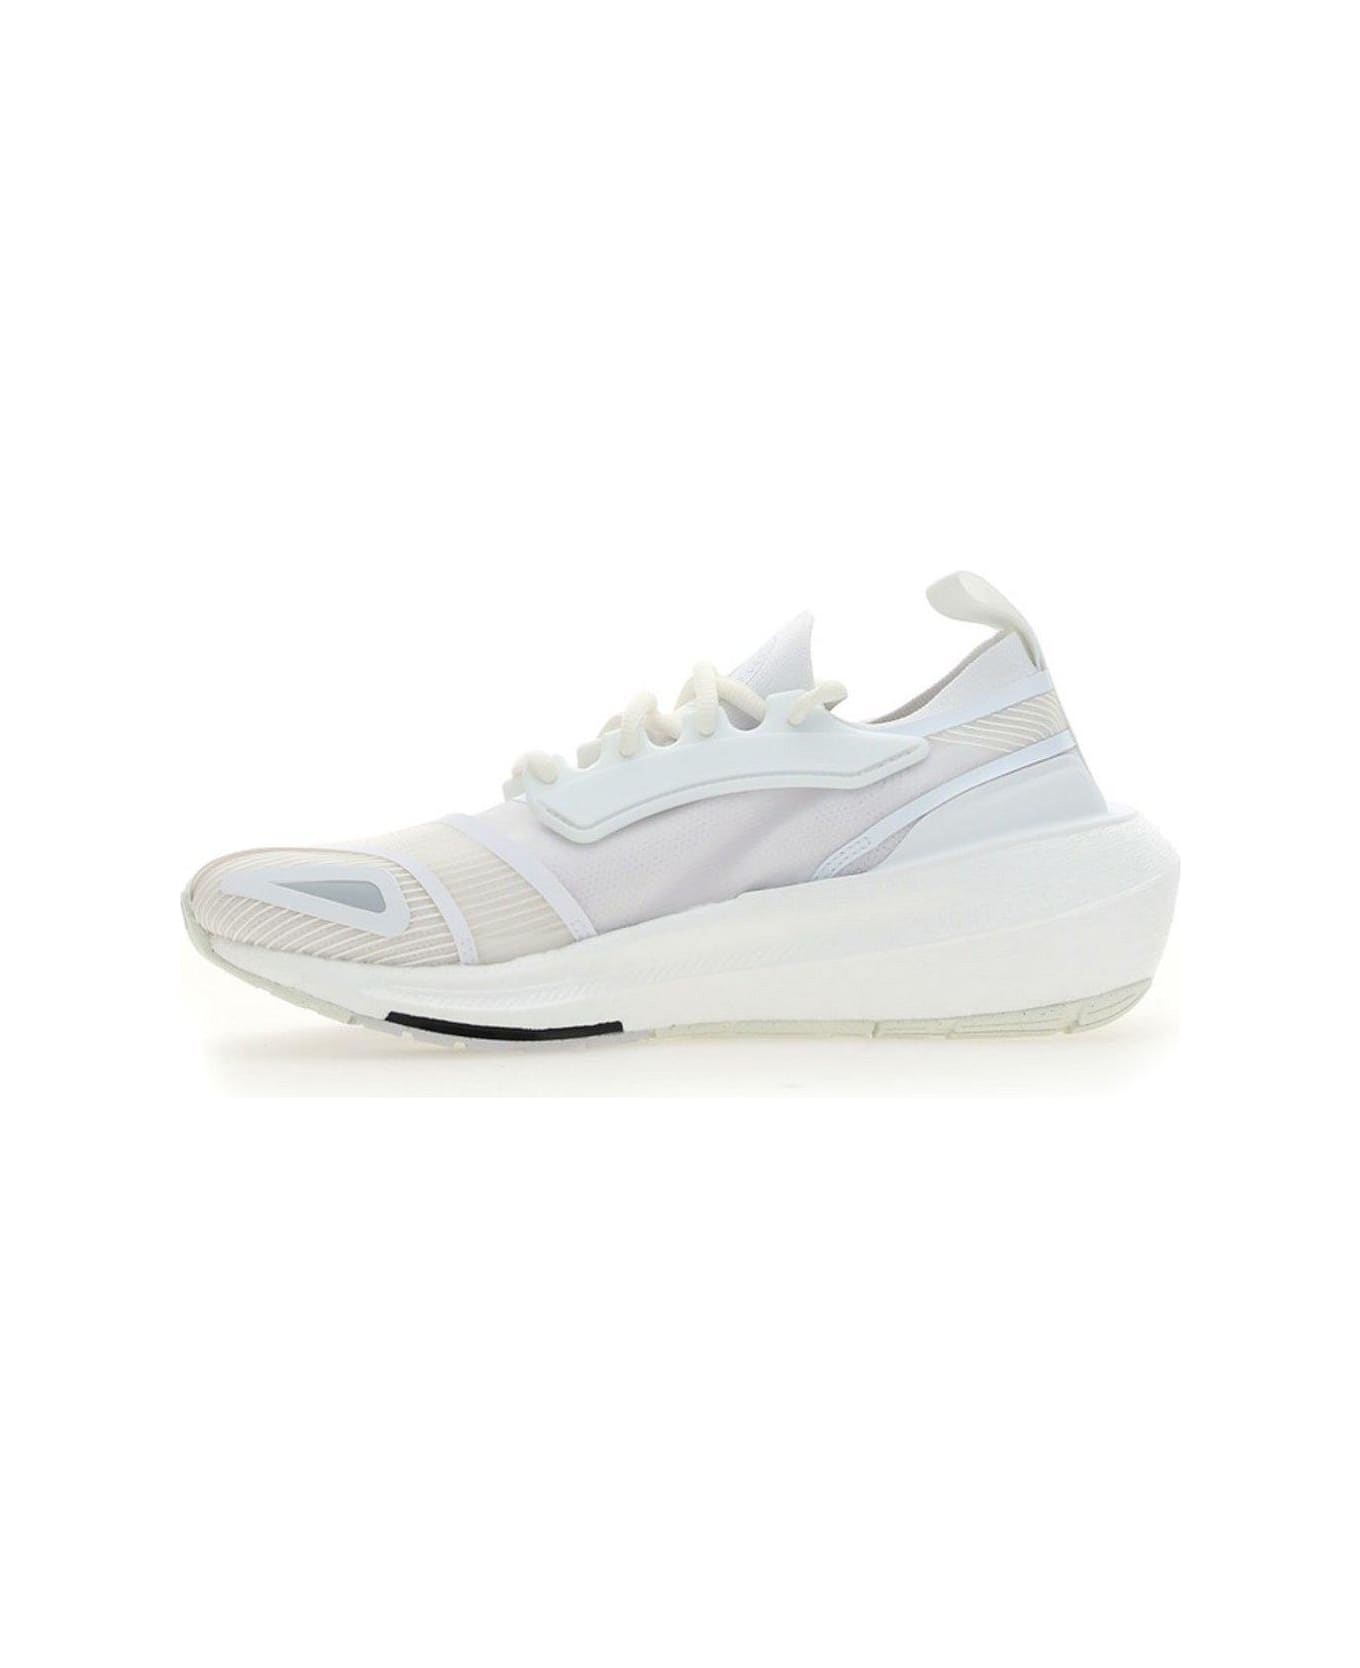 Adidas by Stella McCartney Ultraboost Light Lace-up Sneakers - White